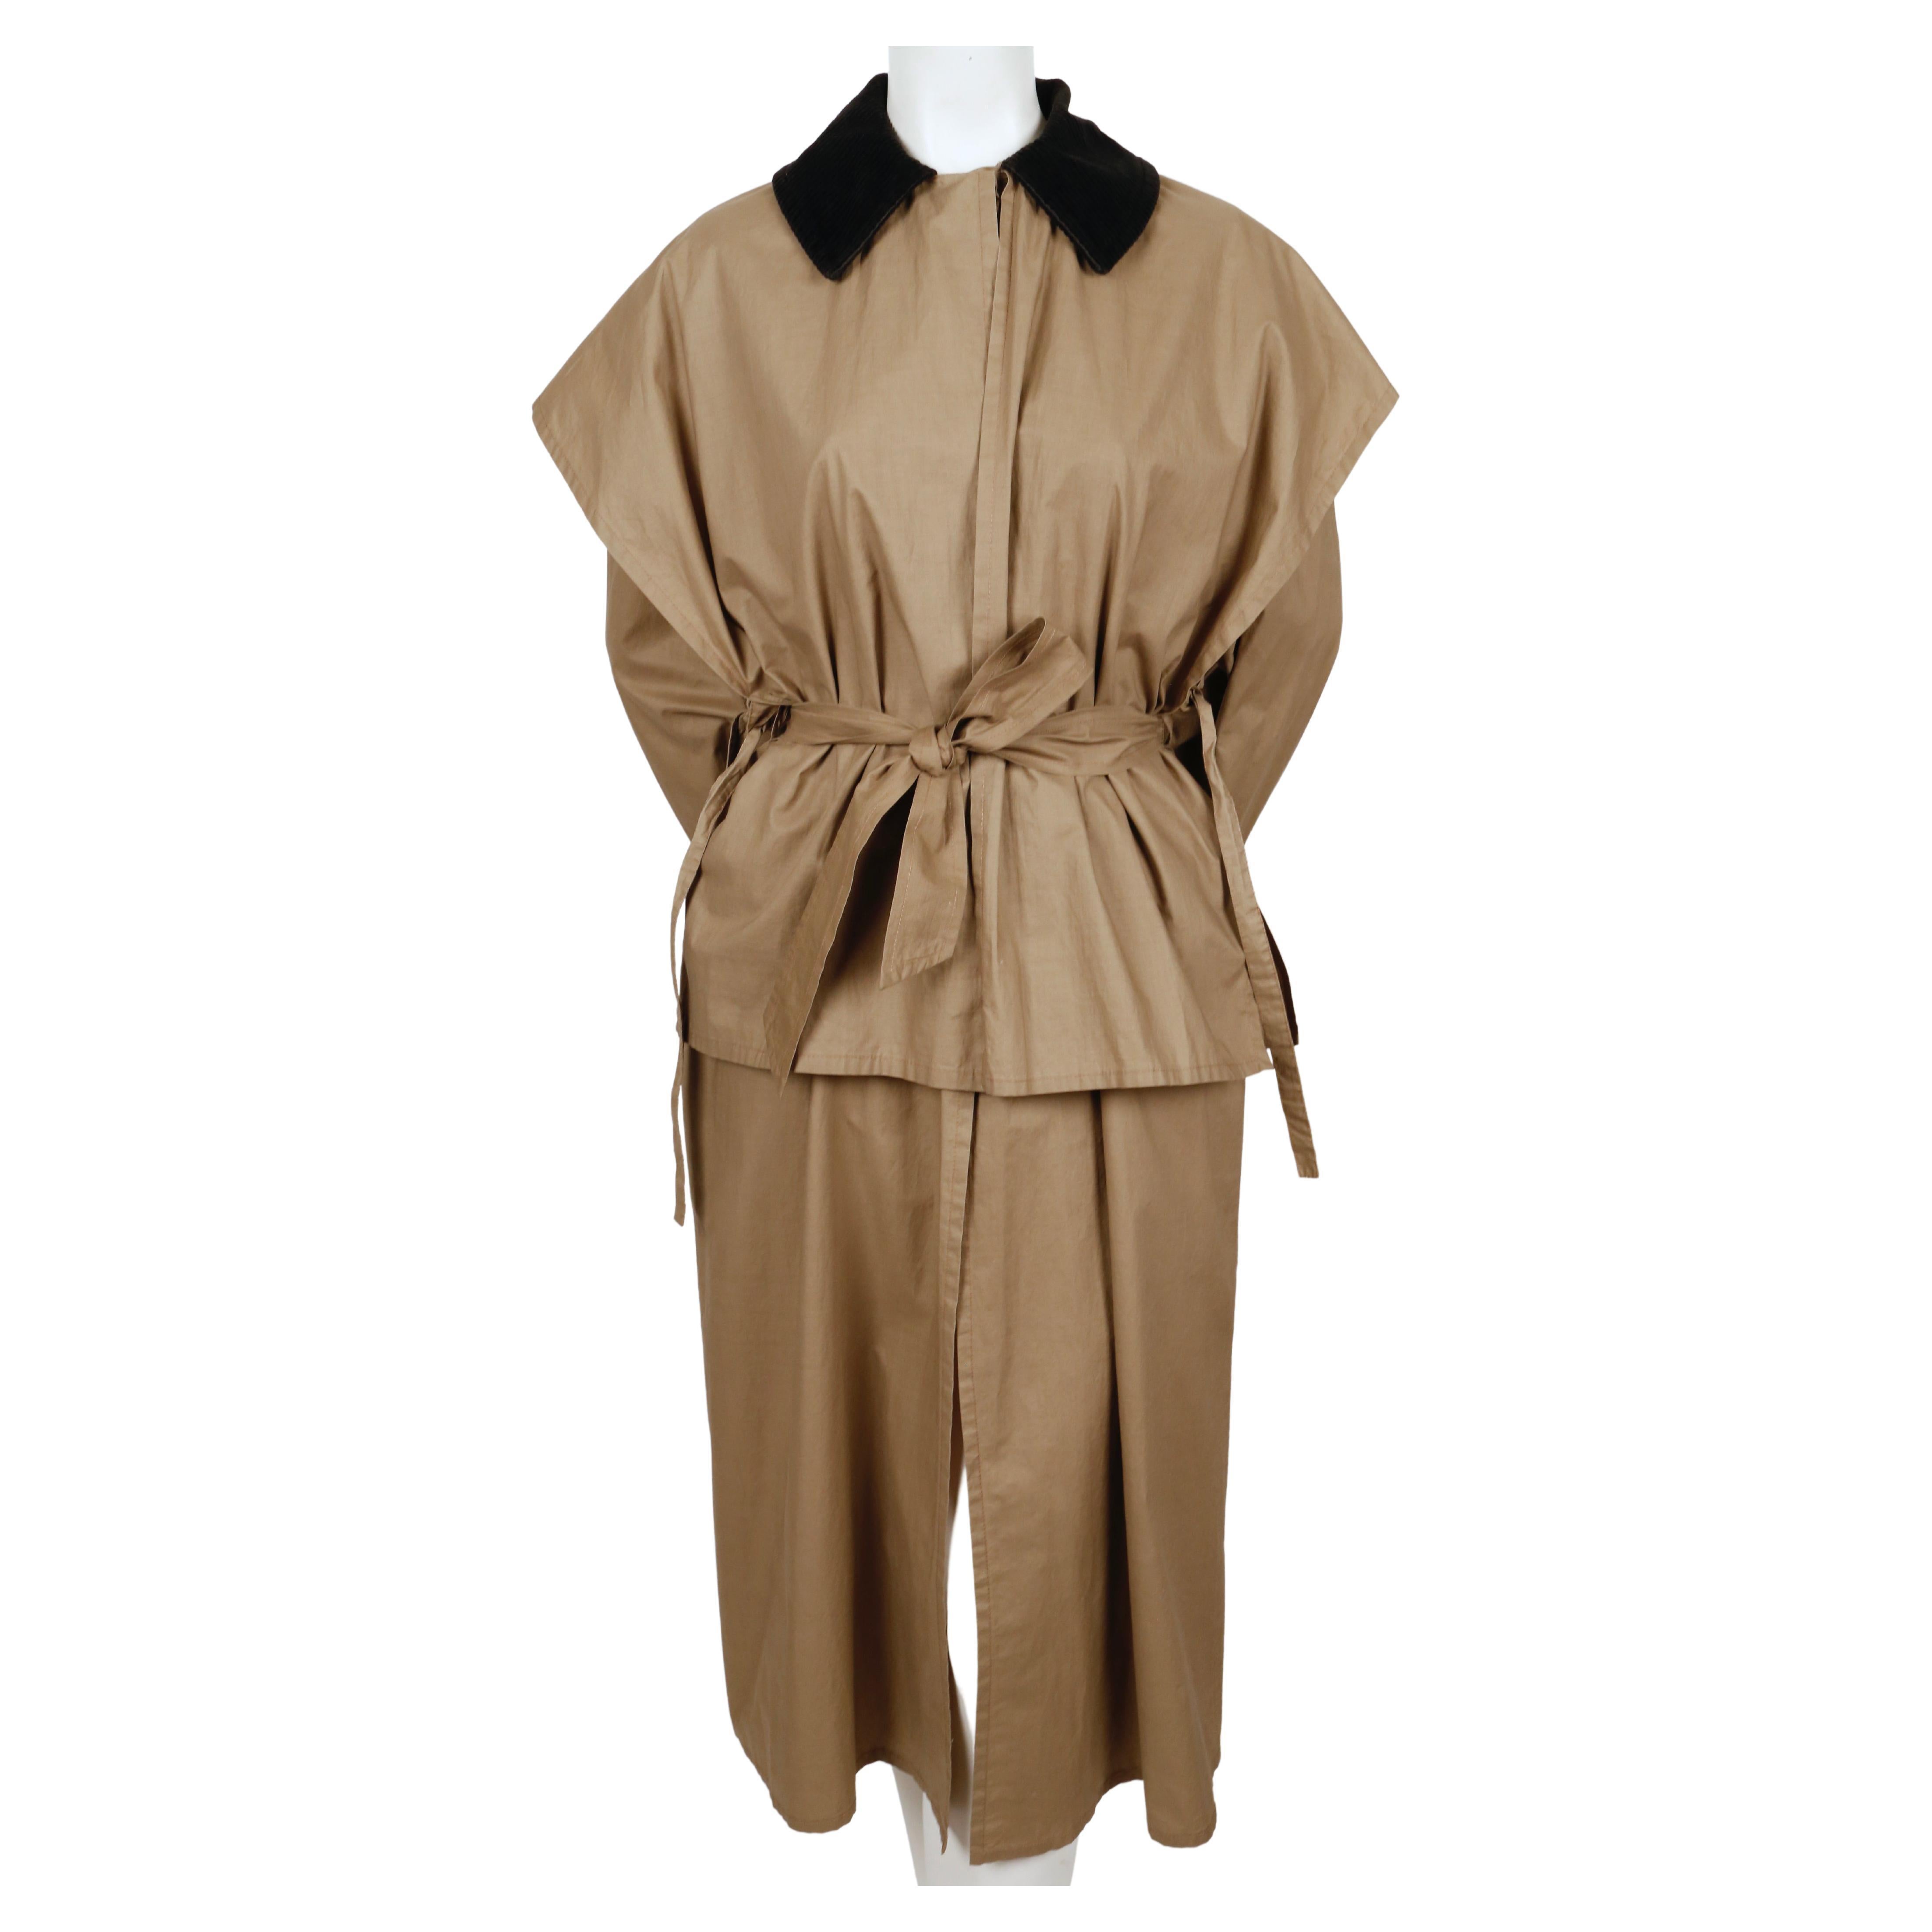 Tan, unlined, lightweight trench coat with black corduroy trim and cape detail designed by Sonia Rykiel dating to the 1970's. Cape can be worn over or under belt and has ties on each side. No size is indicated however this would fit a size 2-6